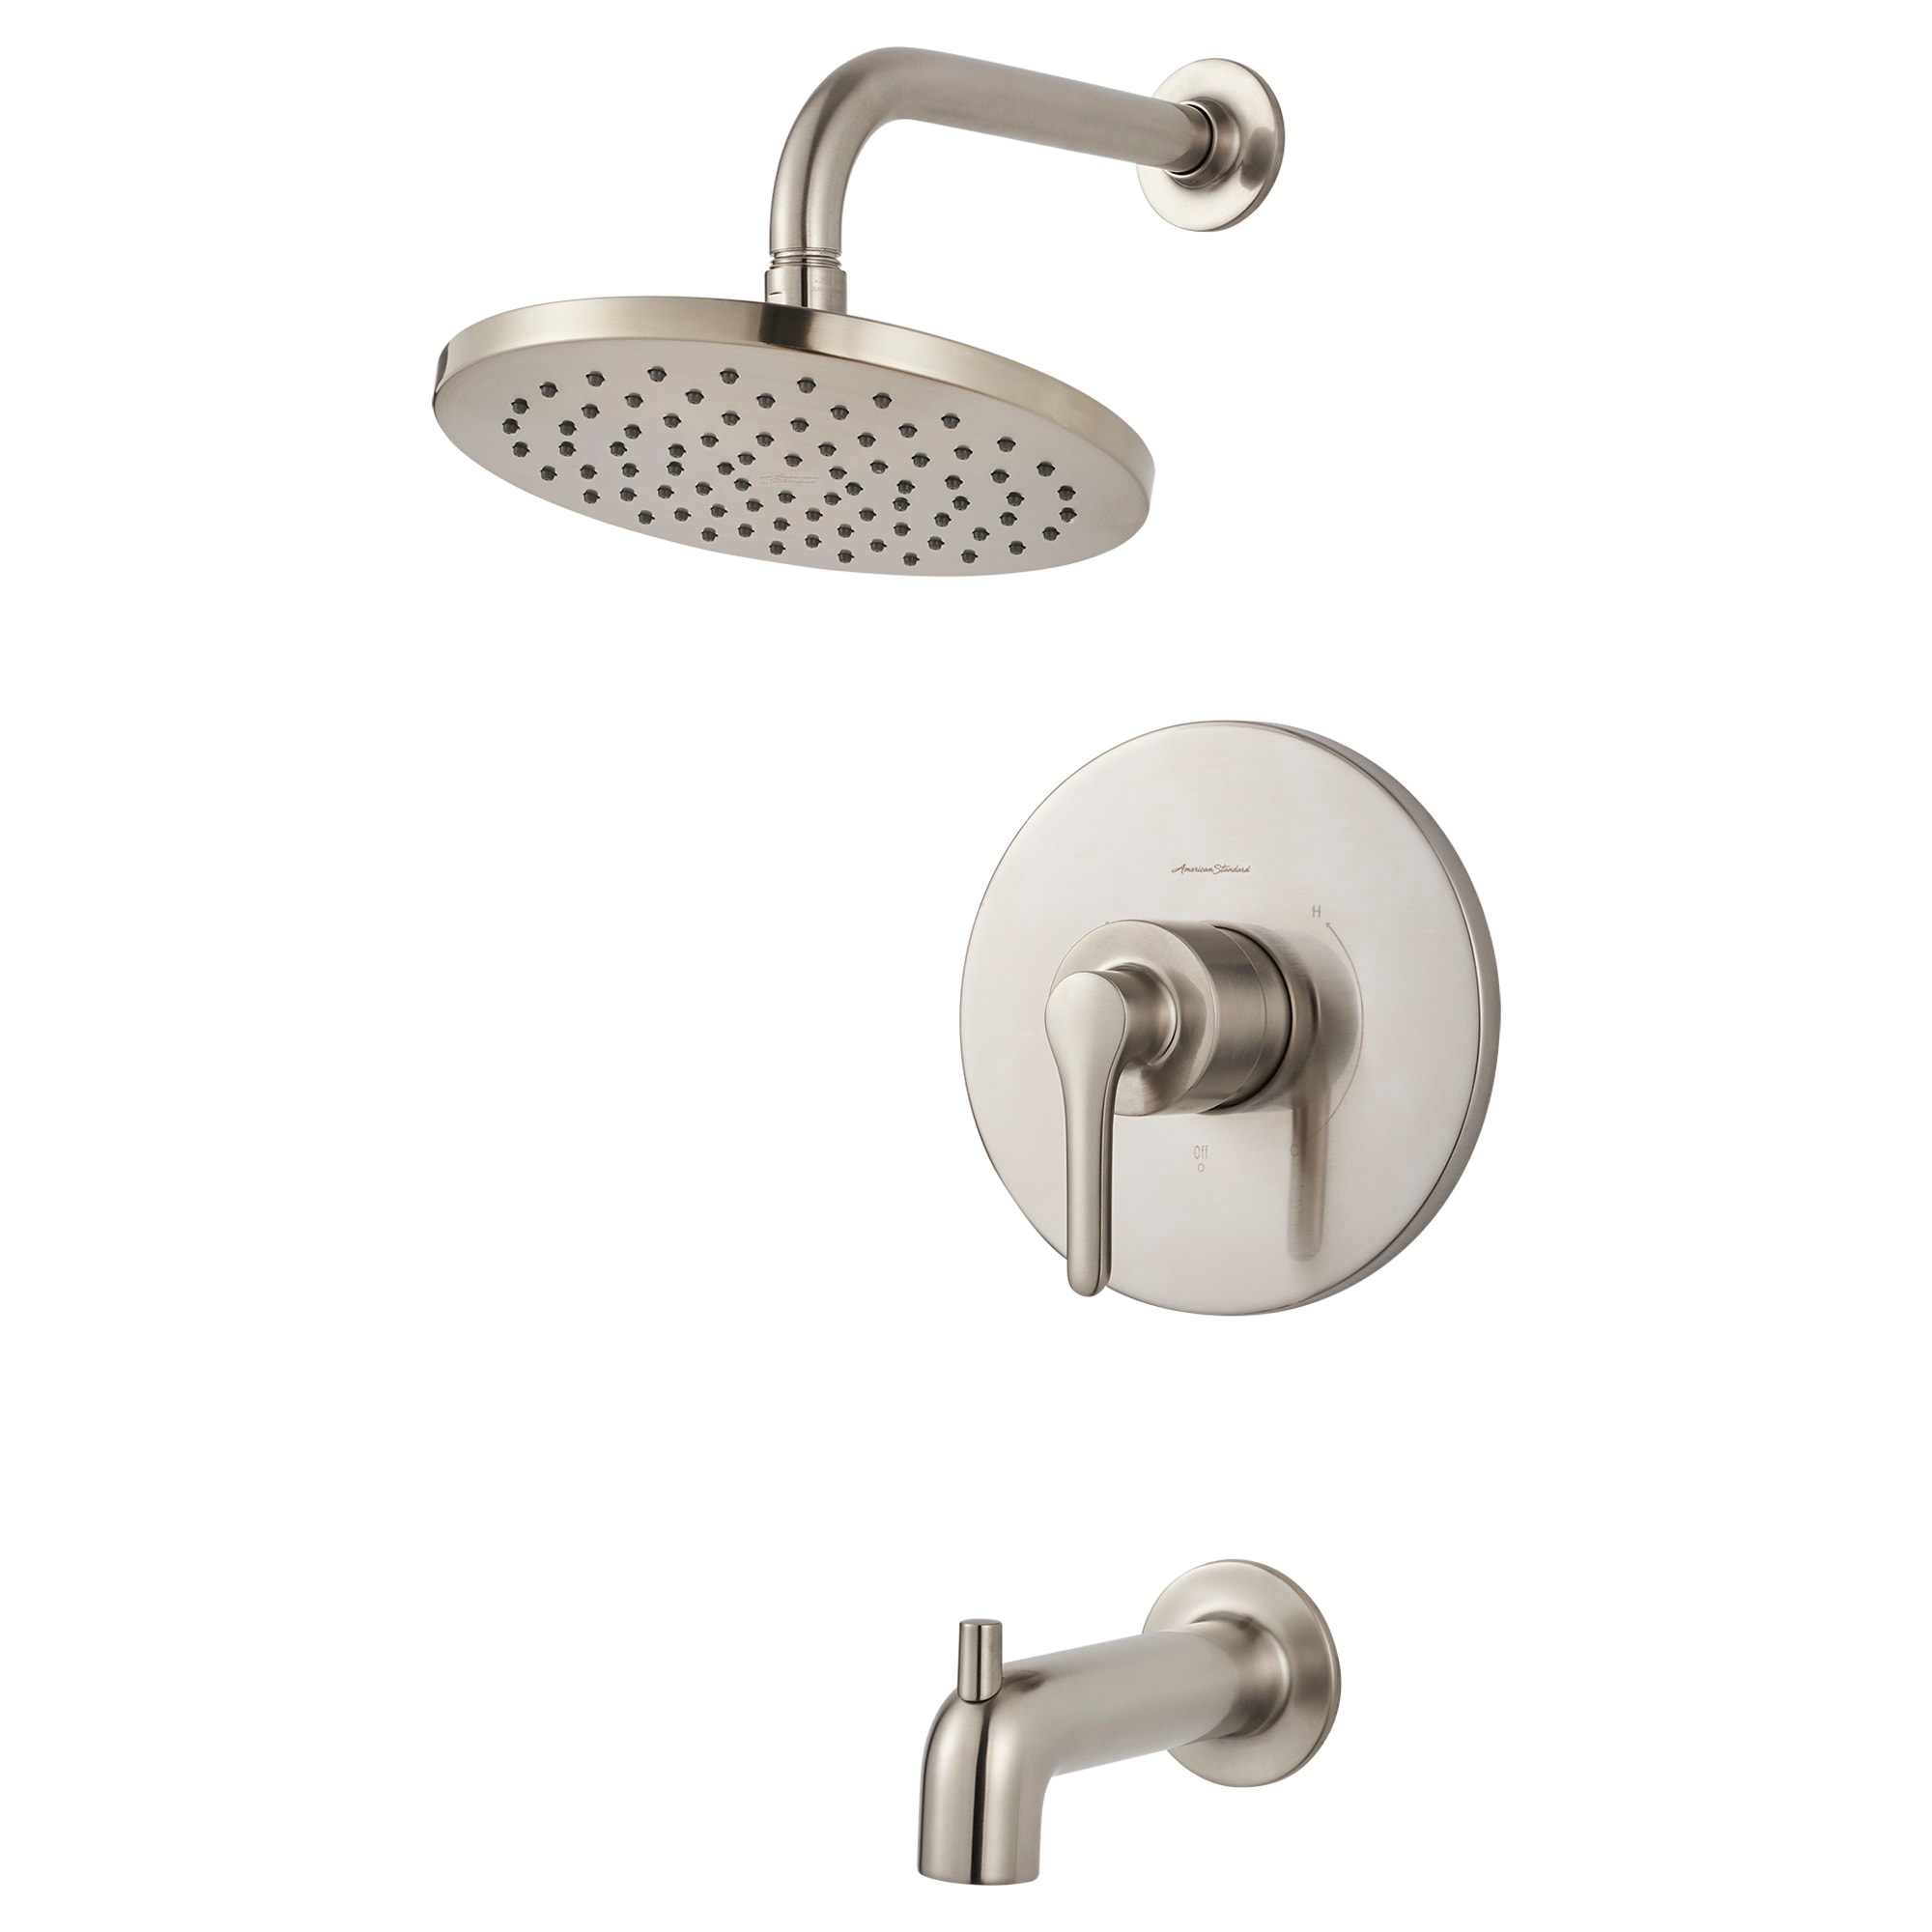 AMERICAN STANDARD Shower Fitting,Two Handle Bath 3275502.002 New 